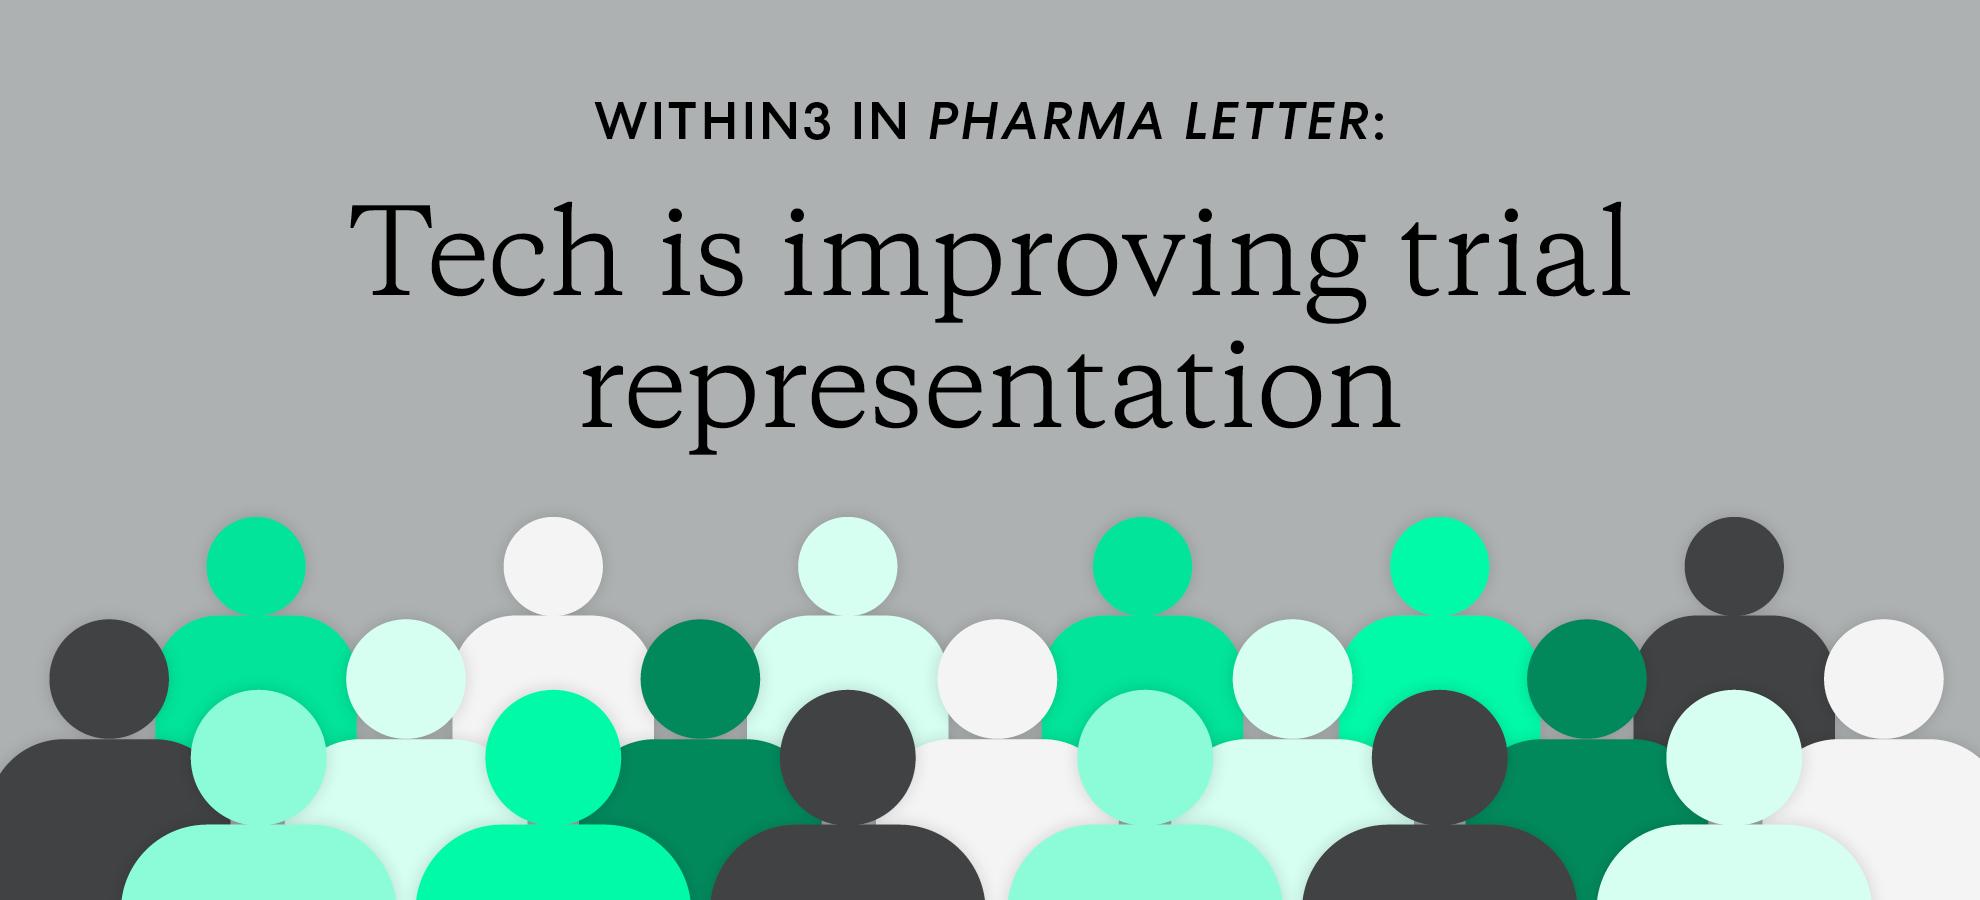 Within3 in The Pharma Letter: how tech improves trial representation, retention